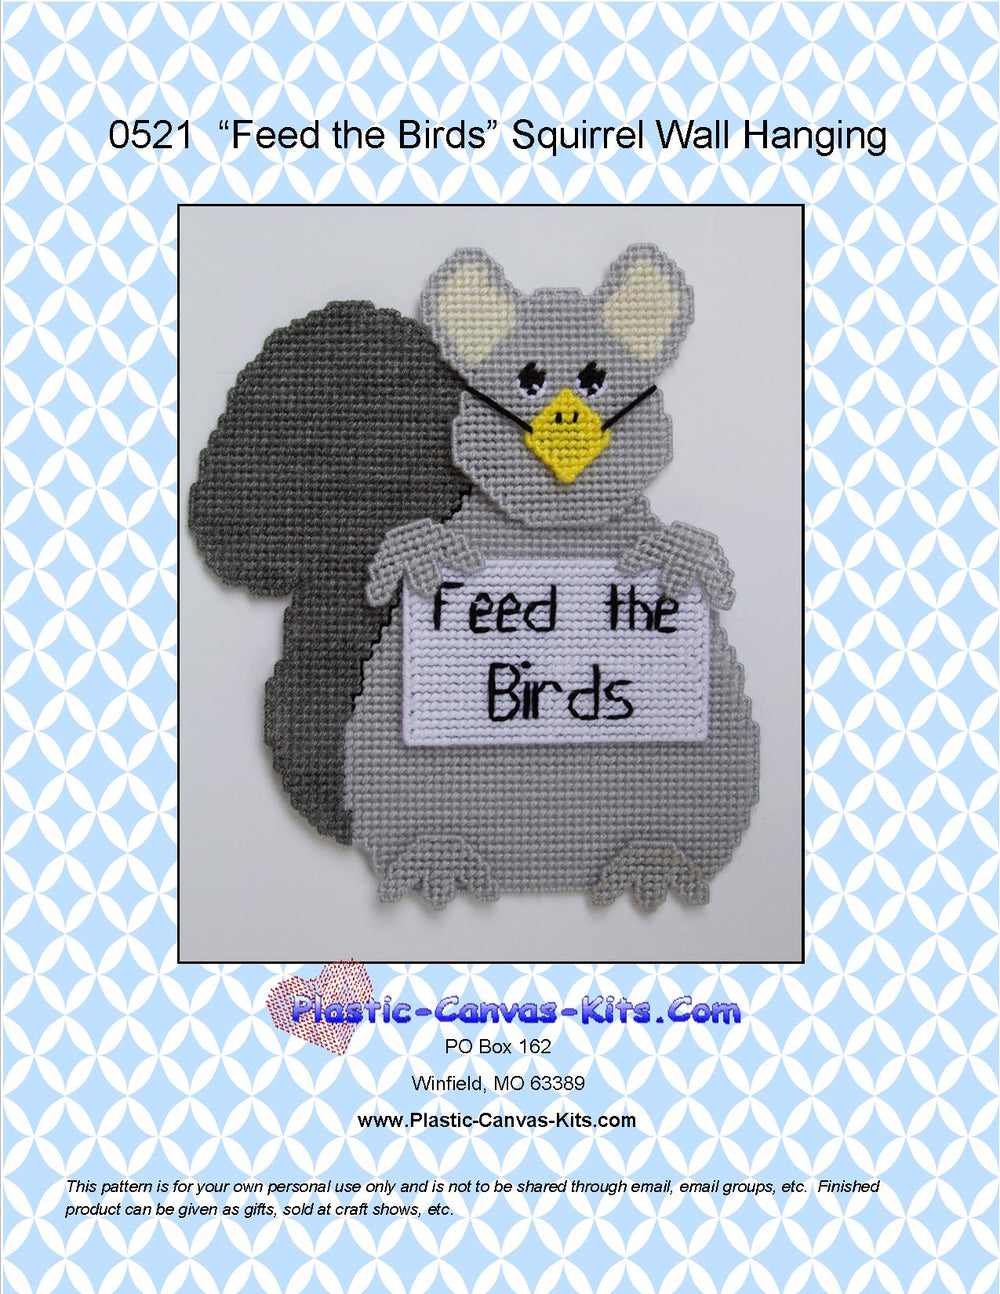 Feed the Birds Squirrel Wall Hanging